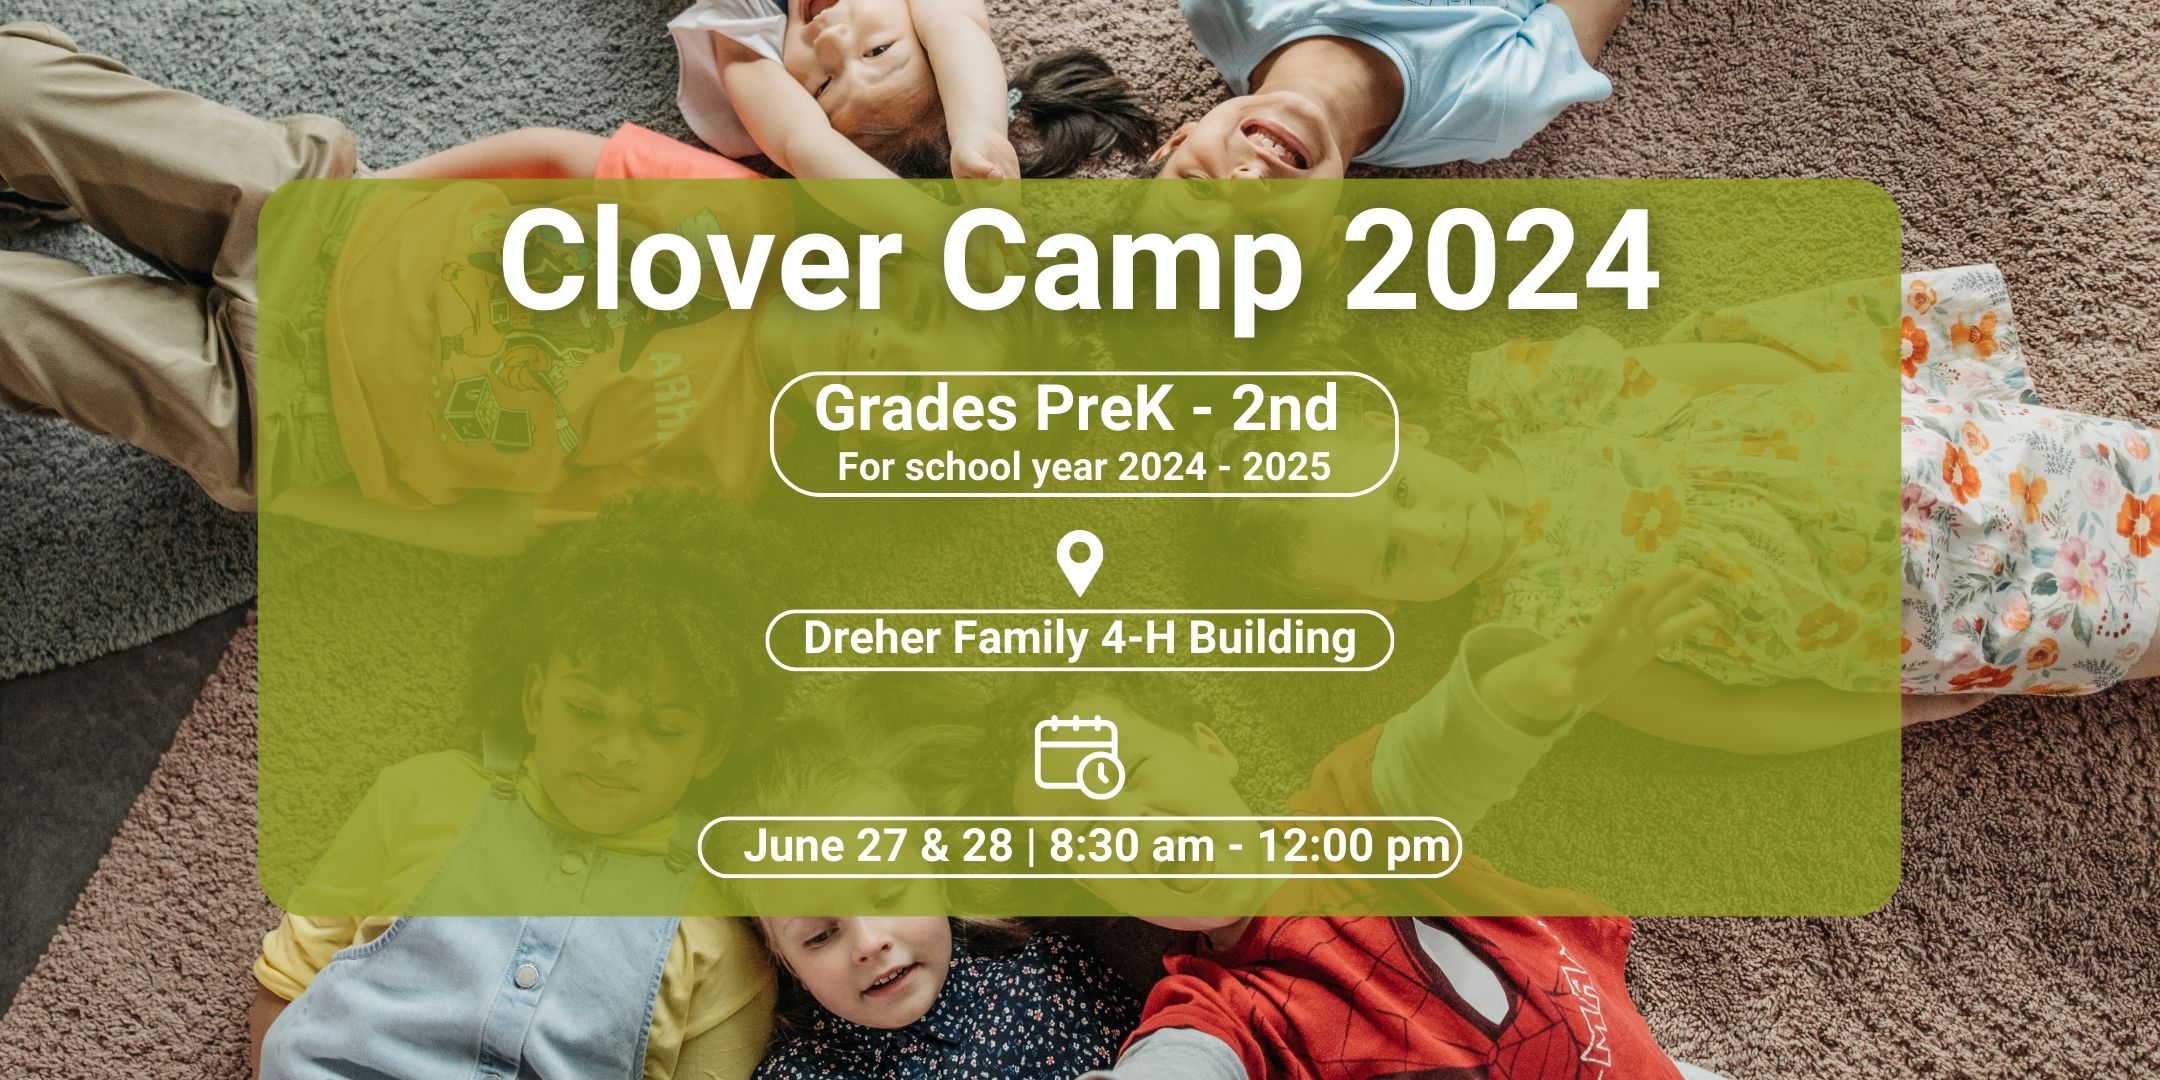 Dreher Family 4-H Building Clover Camp 2024 June 27 & 28 | 8:30 am - 12:00 pm Grades PreK - 2nd For school year 2024 - 2025